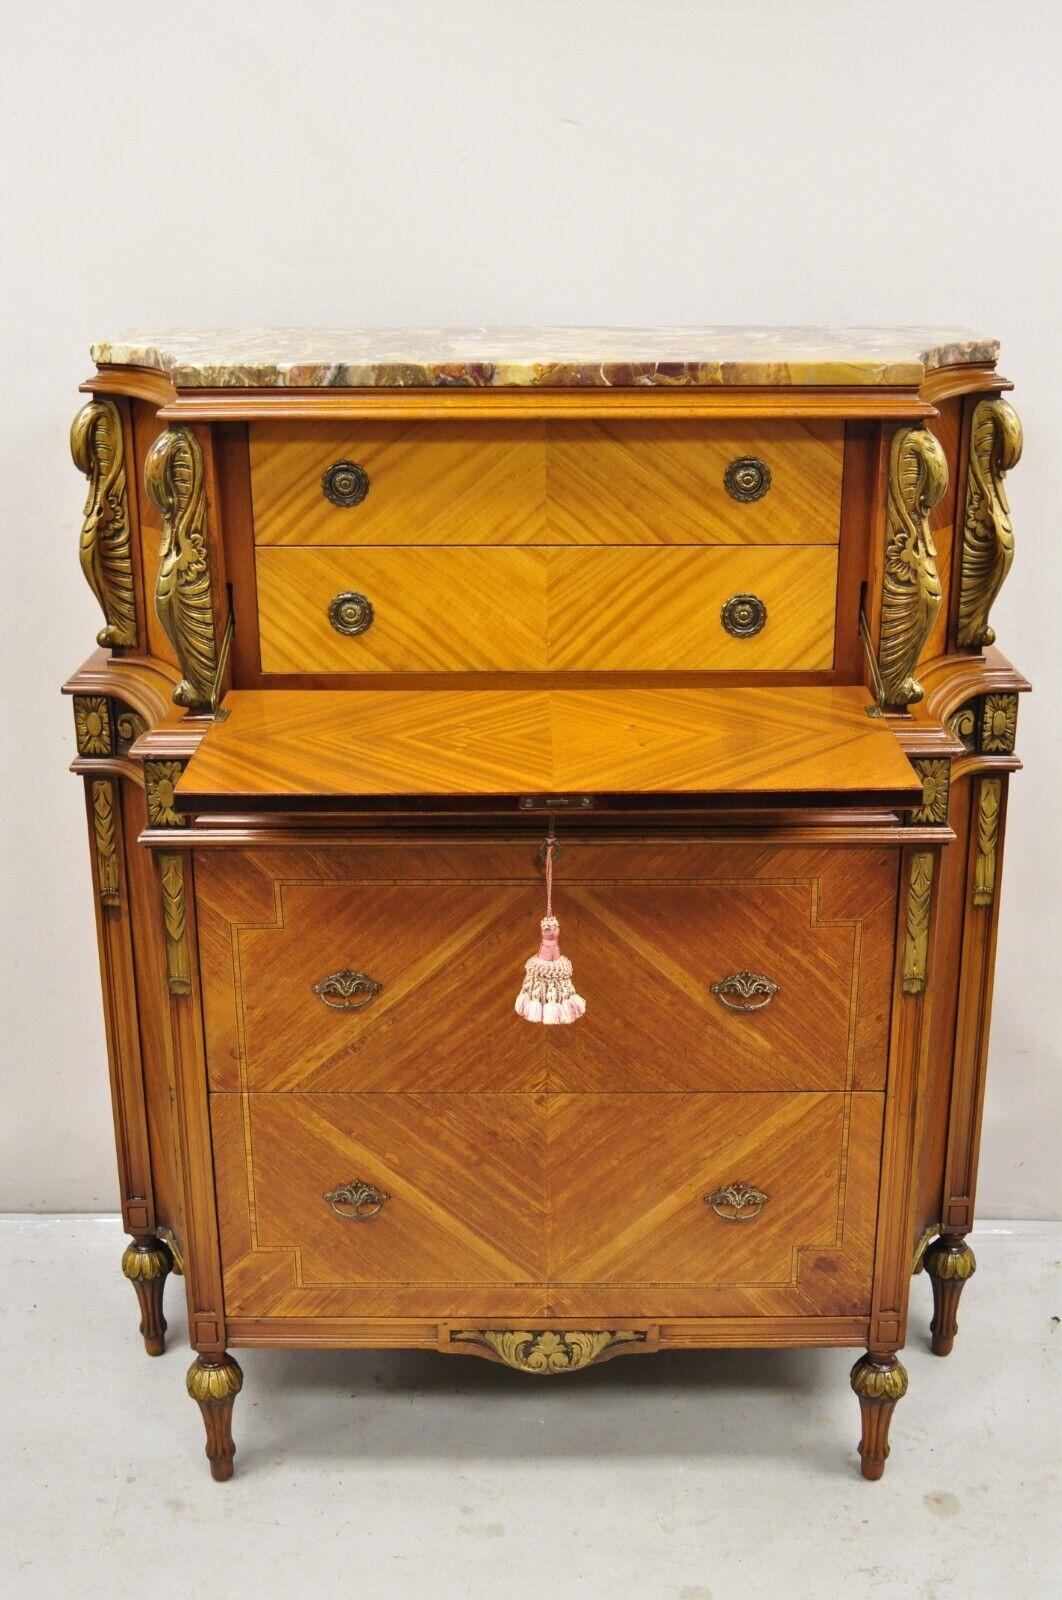 Antique French Louis XVI Style Marble Top Satinwood Tall Chest Dresser w/ Swans For Sale 3